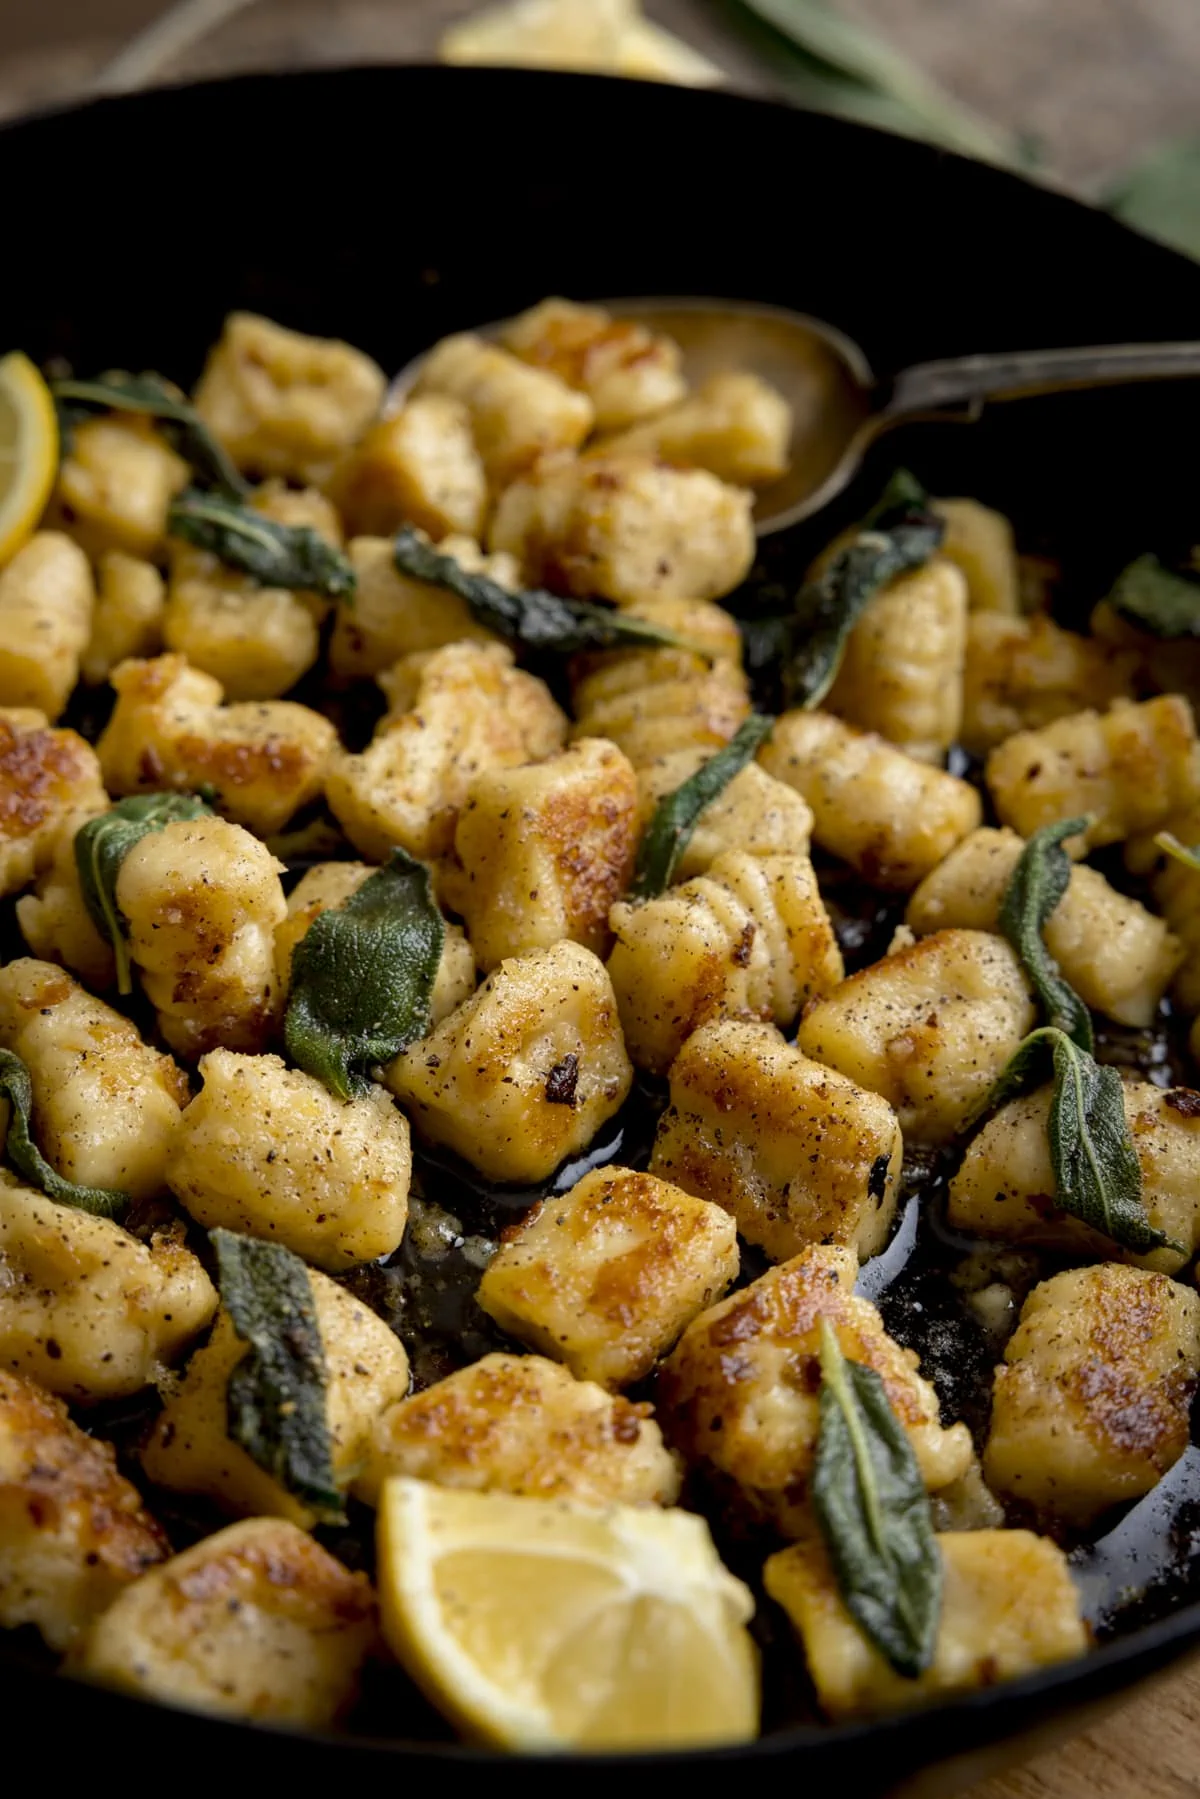 Pan fried gnocchi with brown butter and sage in a pan. There is a lemon wedge in the pan.